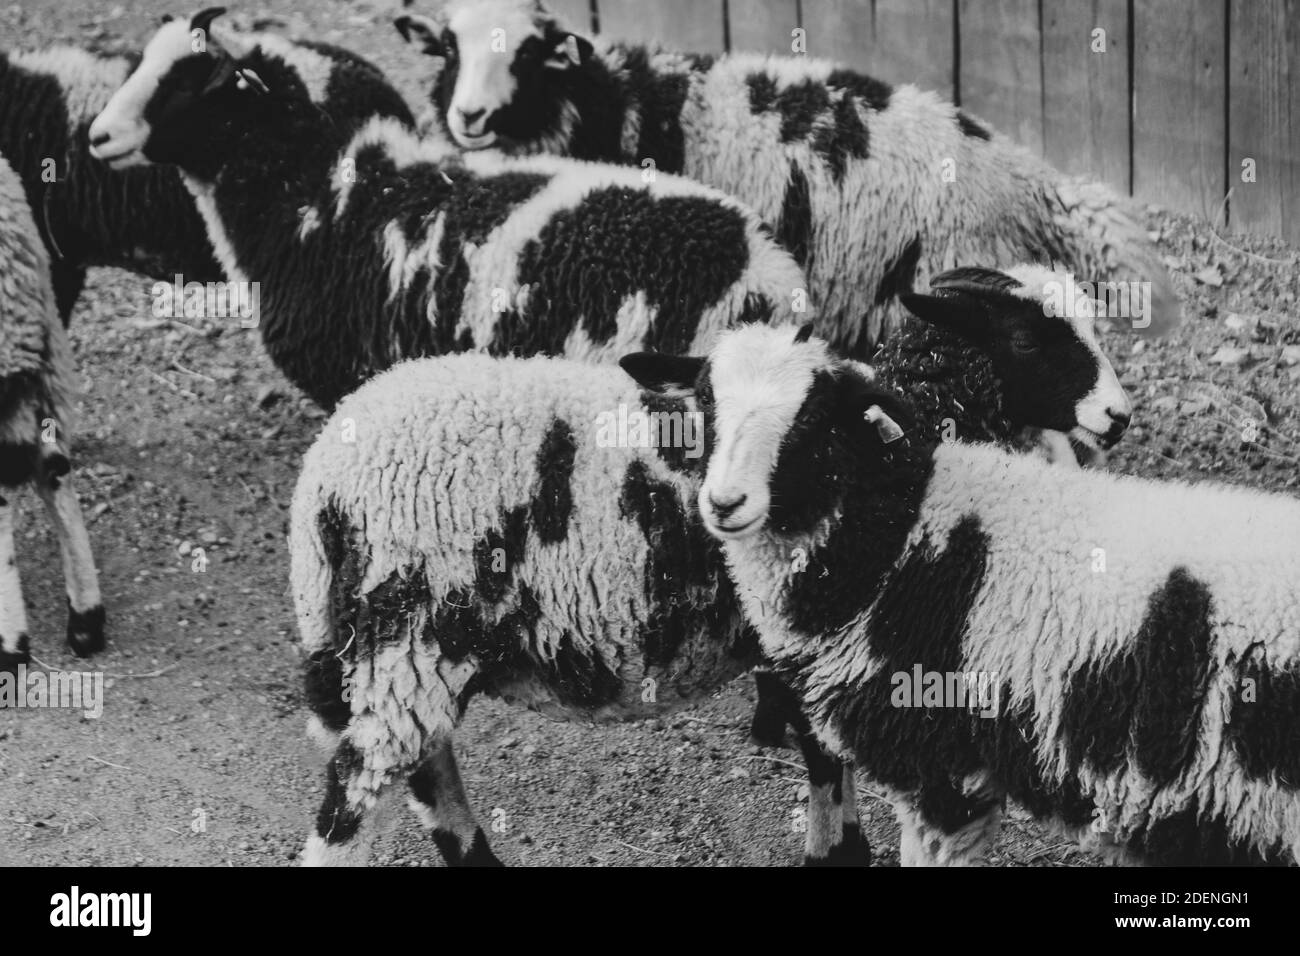 A group of black and white furry goats with horns looking on. Stock Photo